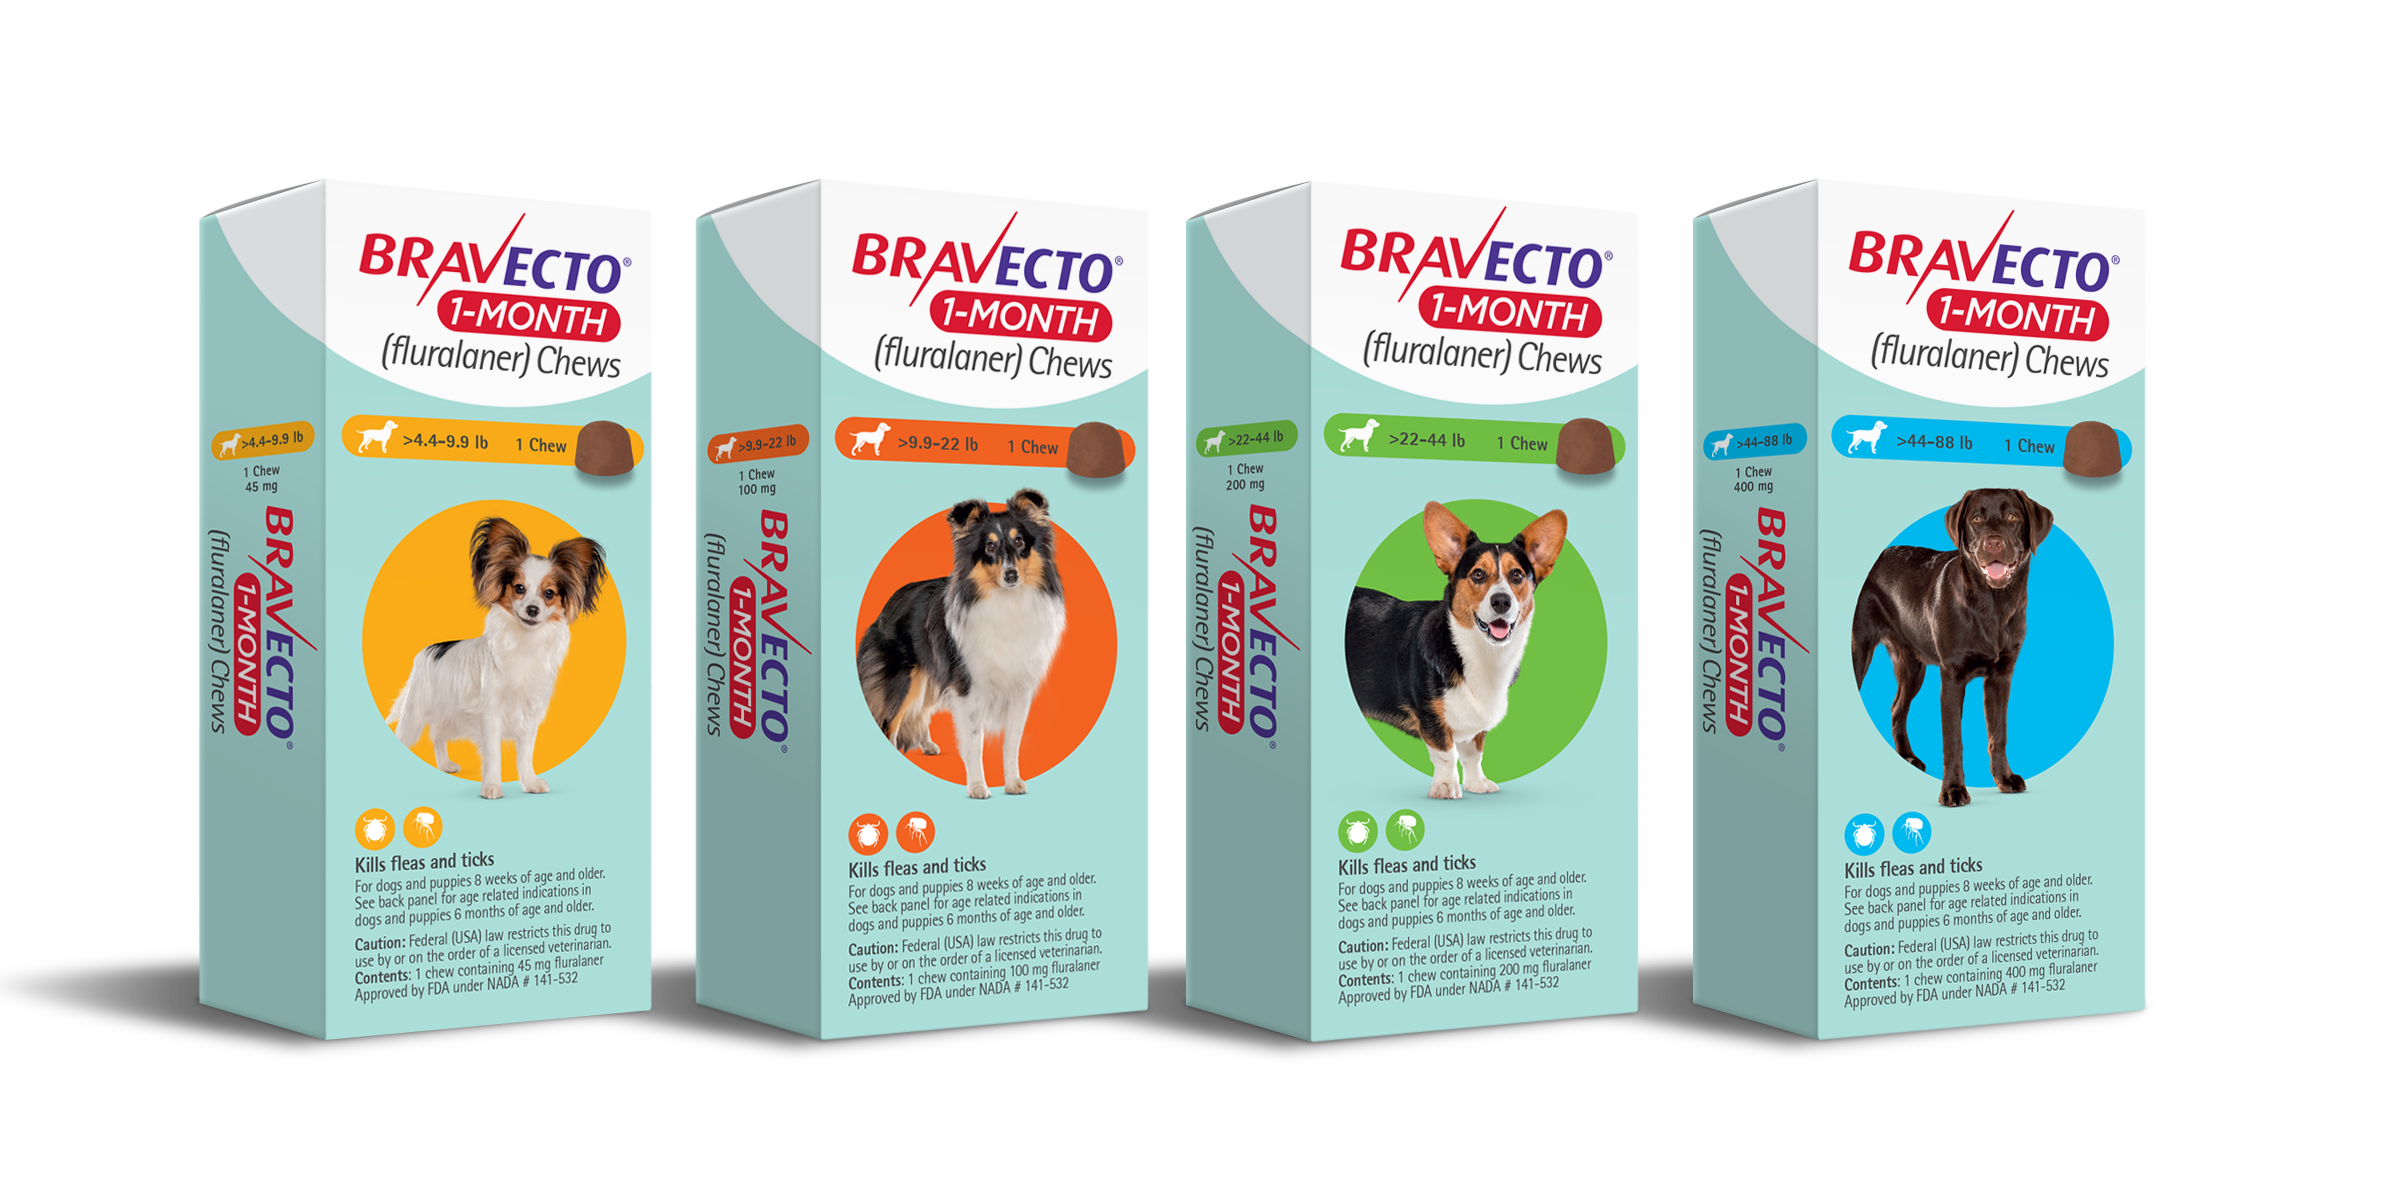 bravecto-1-month-chews-for-dogs-and-puppies-merck-animal-health-usa